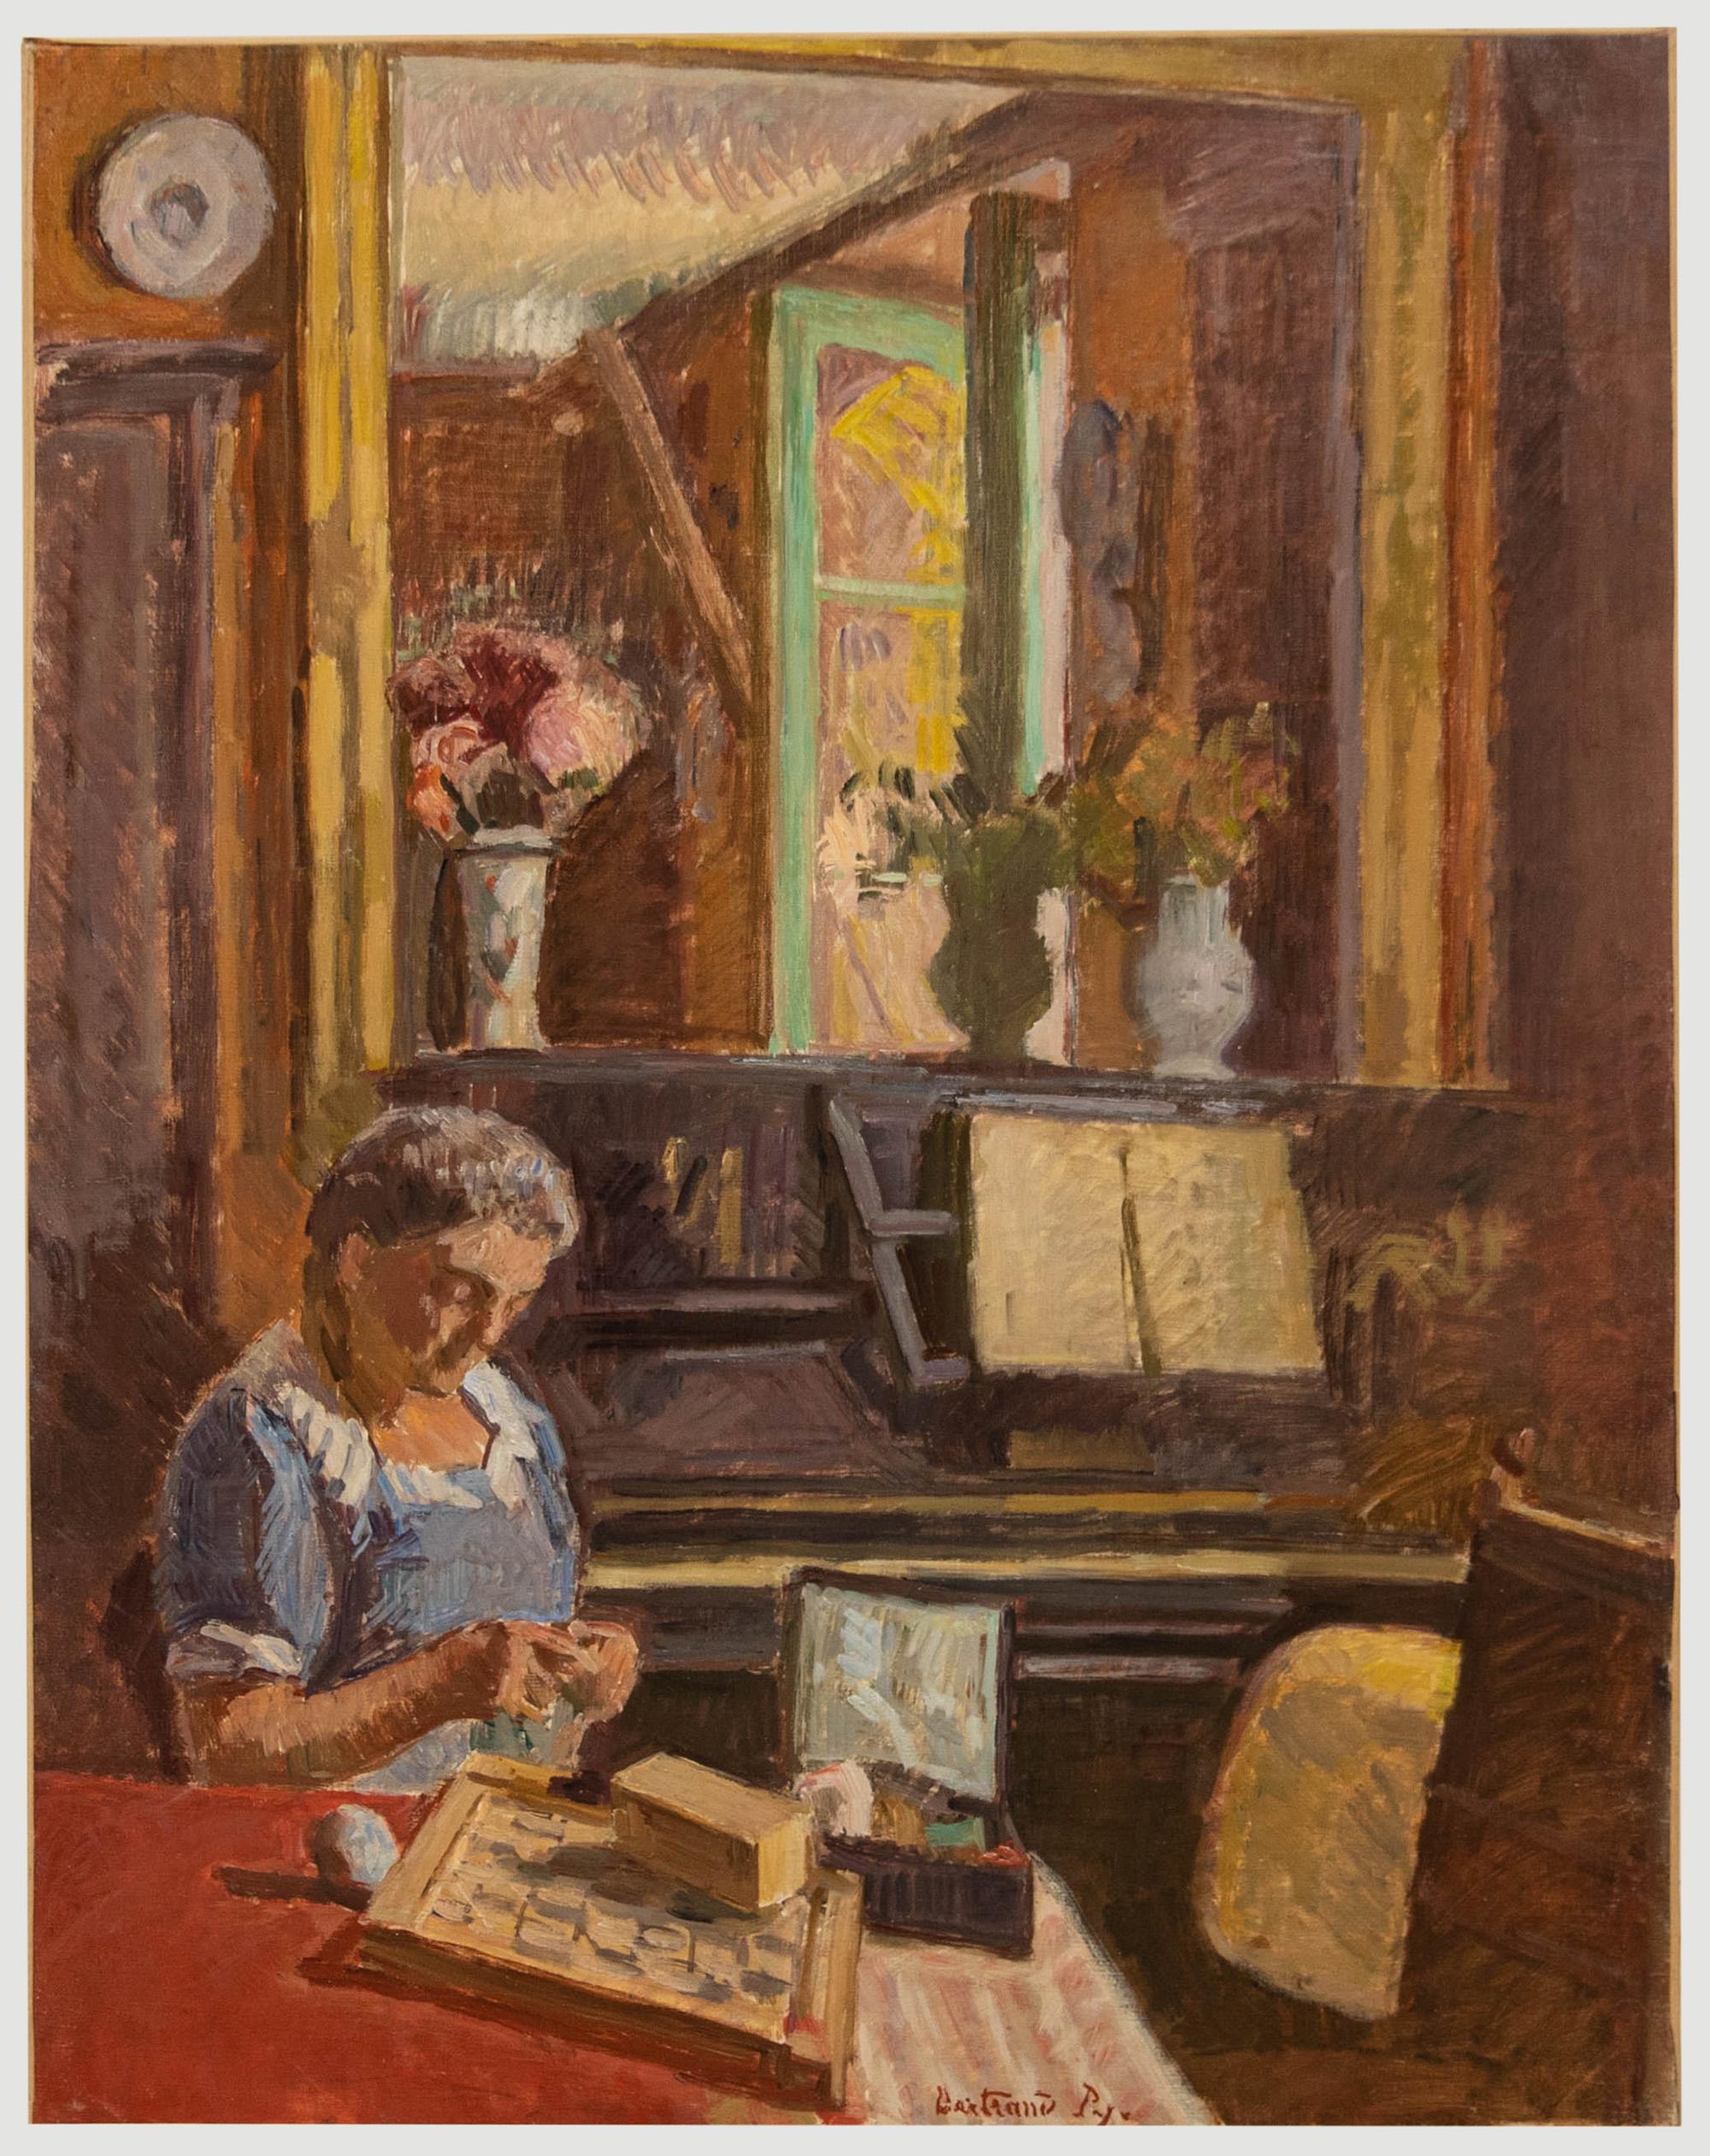 Unknown Interior Painting - Bertrand Py (1895-1973) - Mid 20th Century Oil, The Seamstress